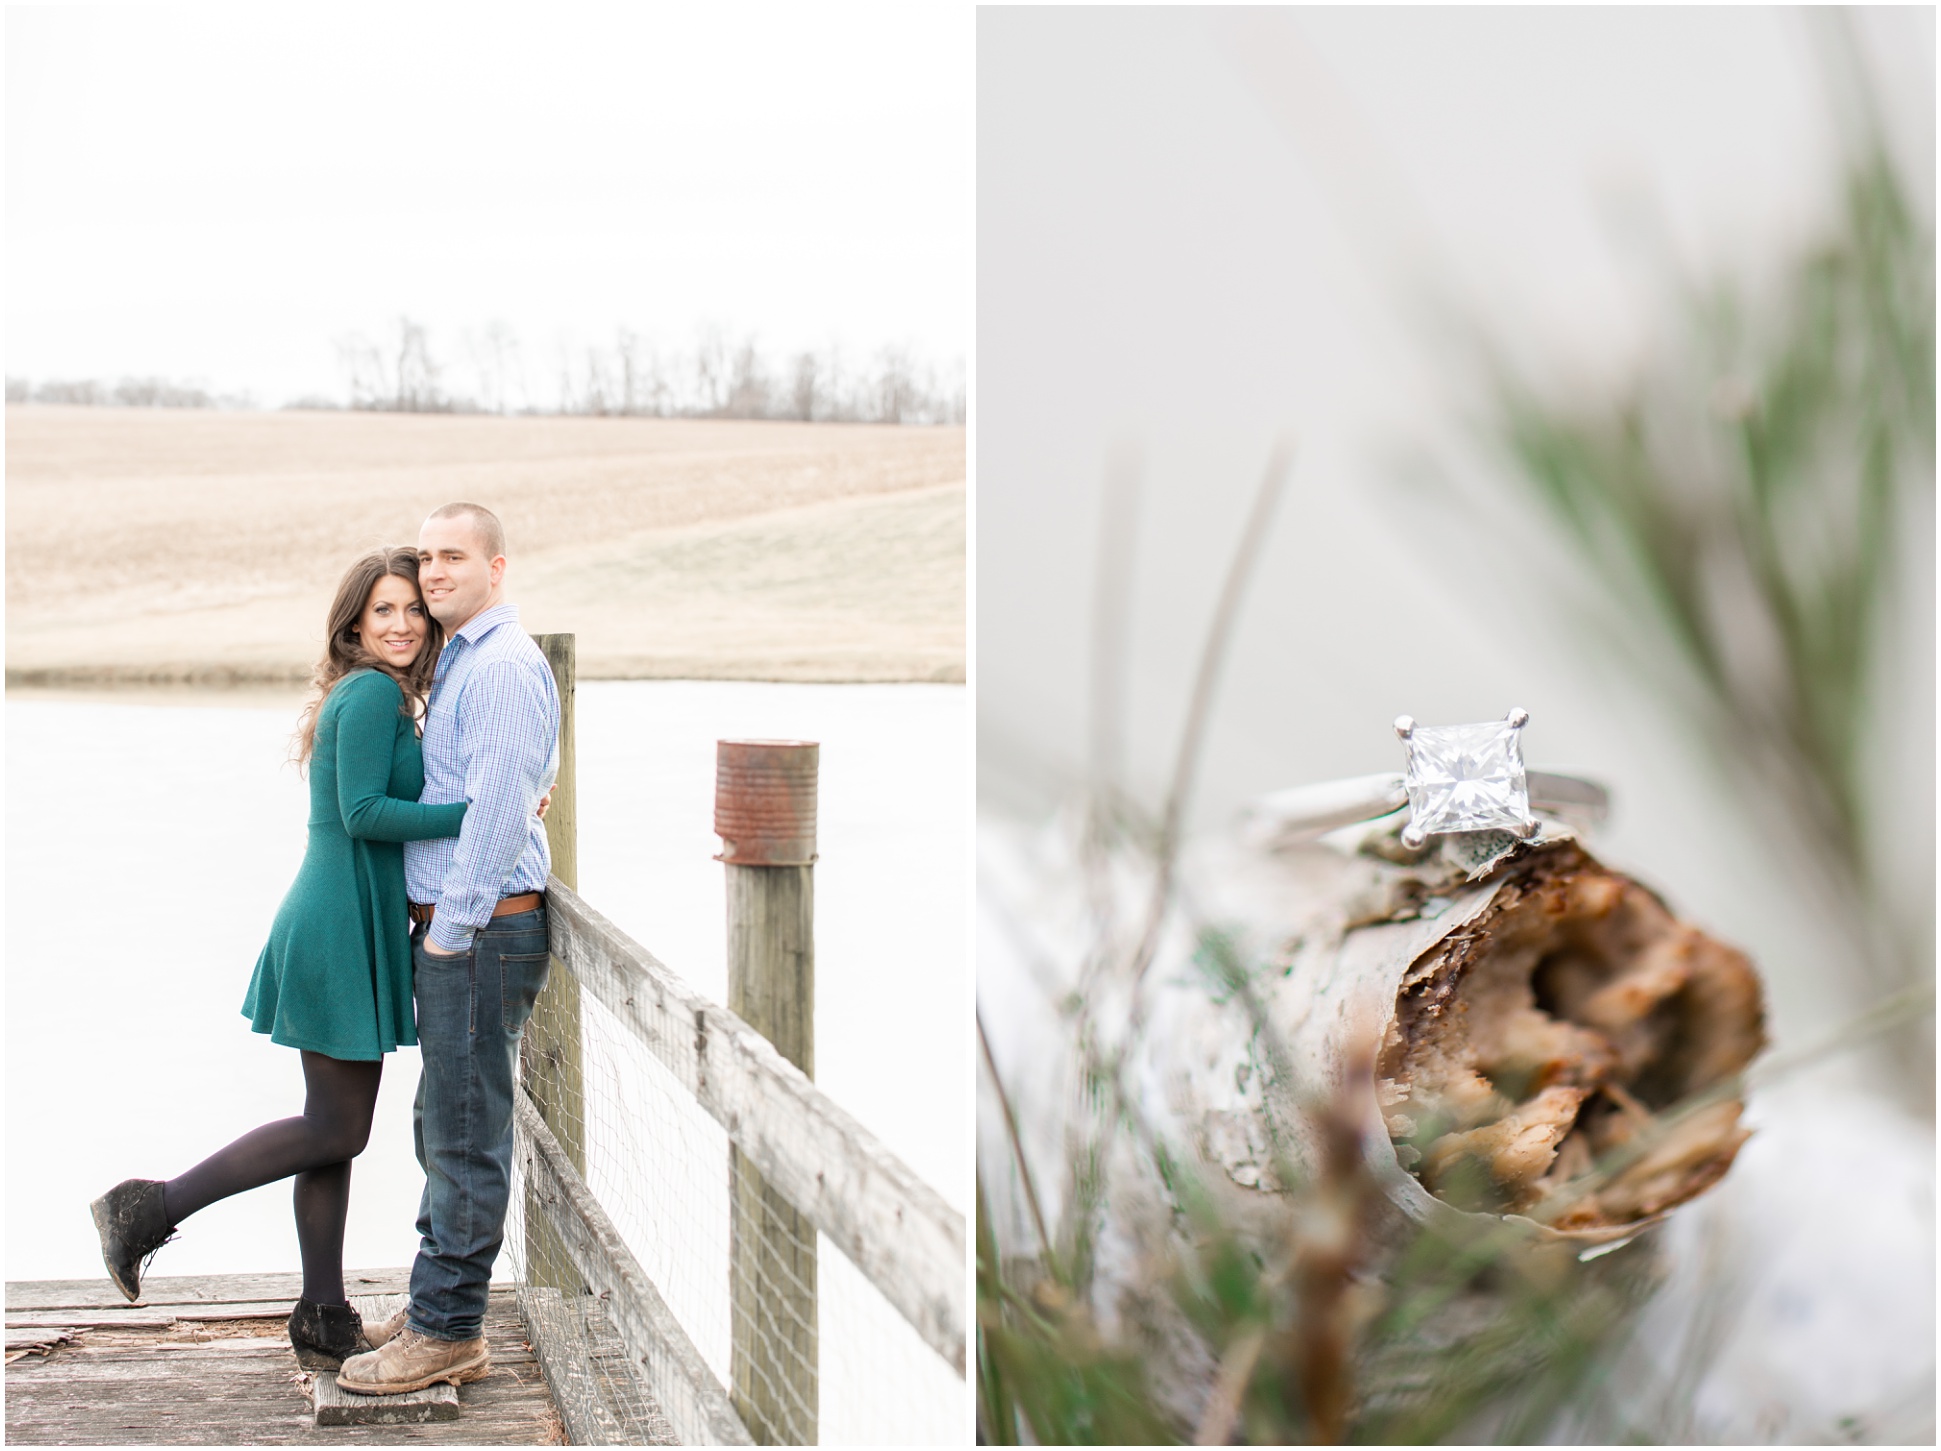 Left IMage: Valerie and Ryan on the dock, right image: Valerie's square diamond engagement ring on white birch